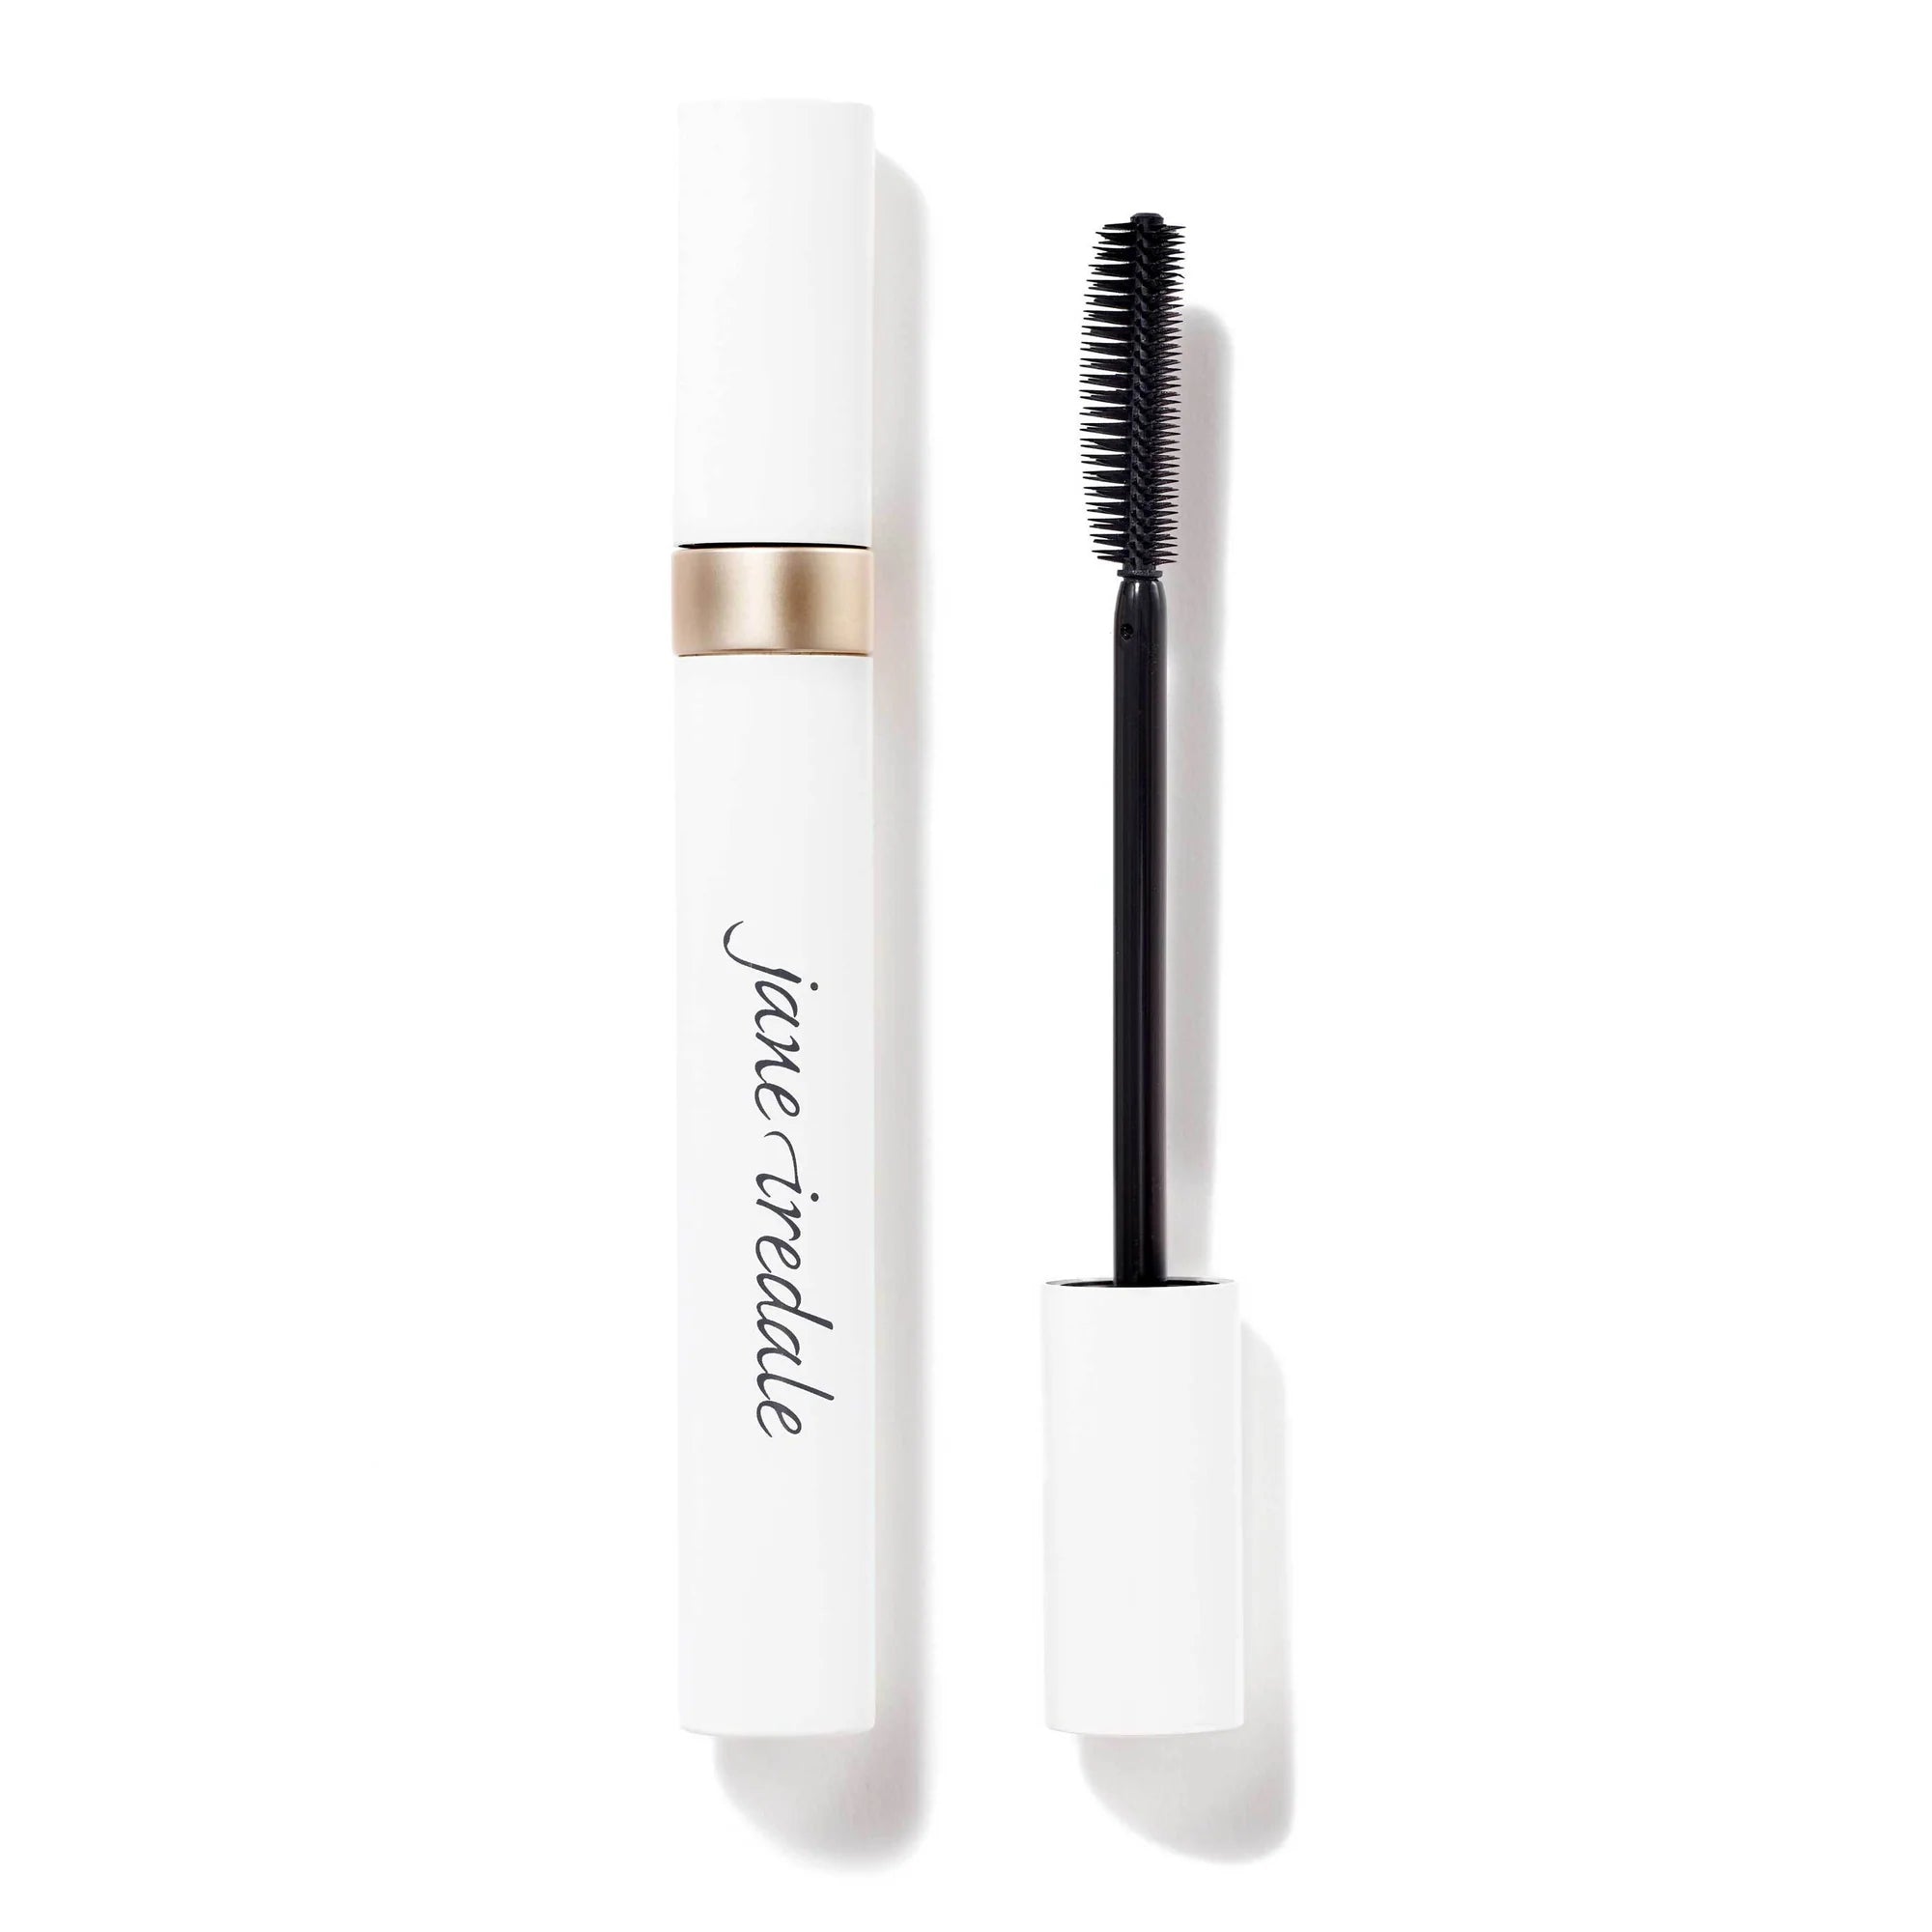 Jane Iredale's PureLash® Lengthening Mascara. Proprietary formula conditions and strengthens while the dual-edged brush makes it easy to maximise lashes top and bottom. Jane Iredale Australian Stockist. Geelong based. Shop now.